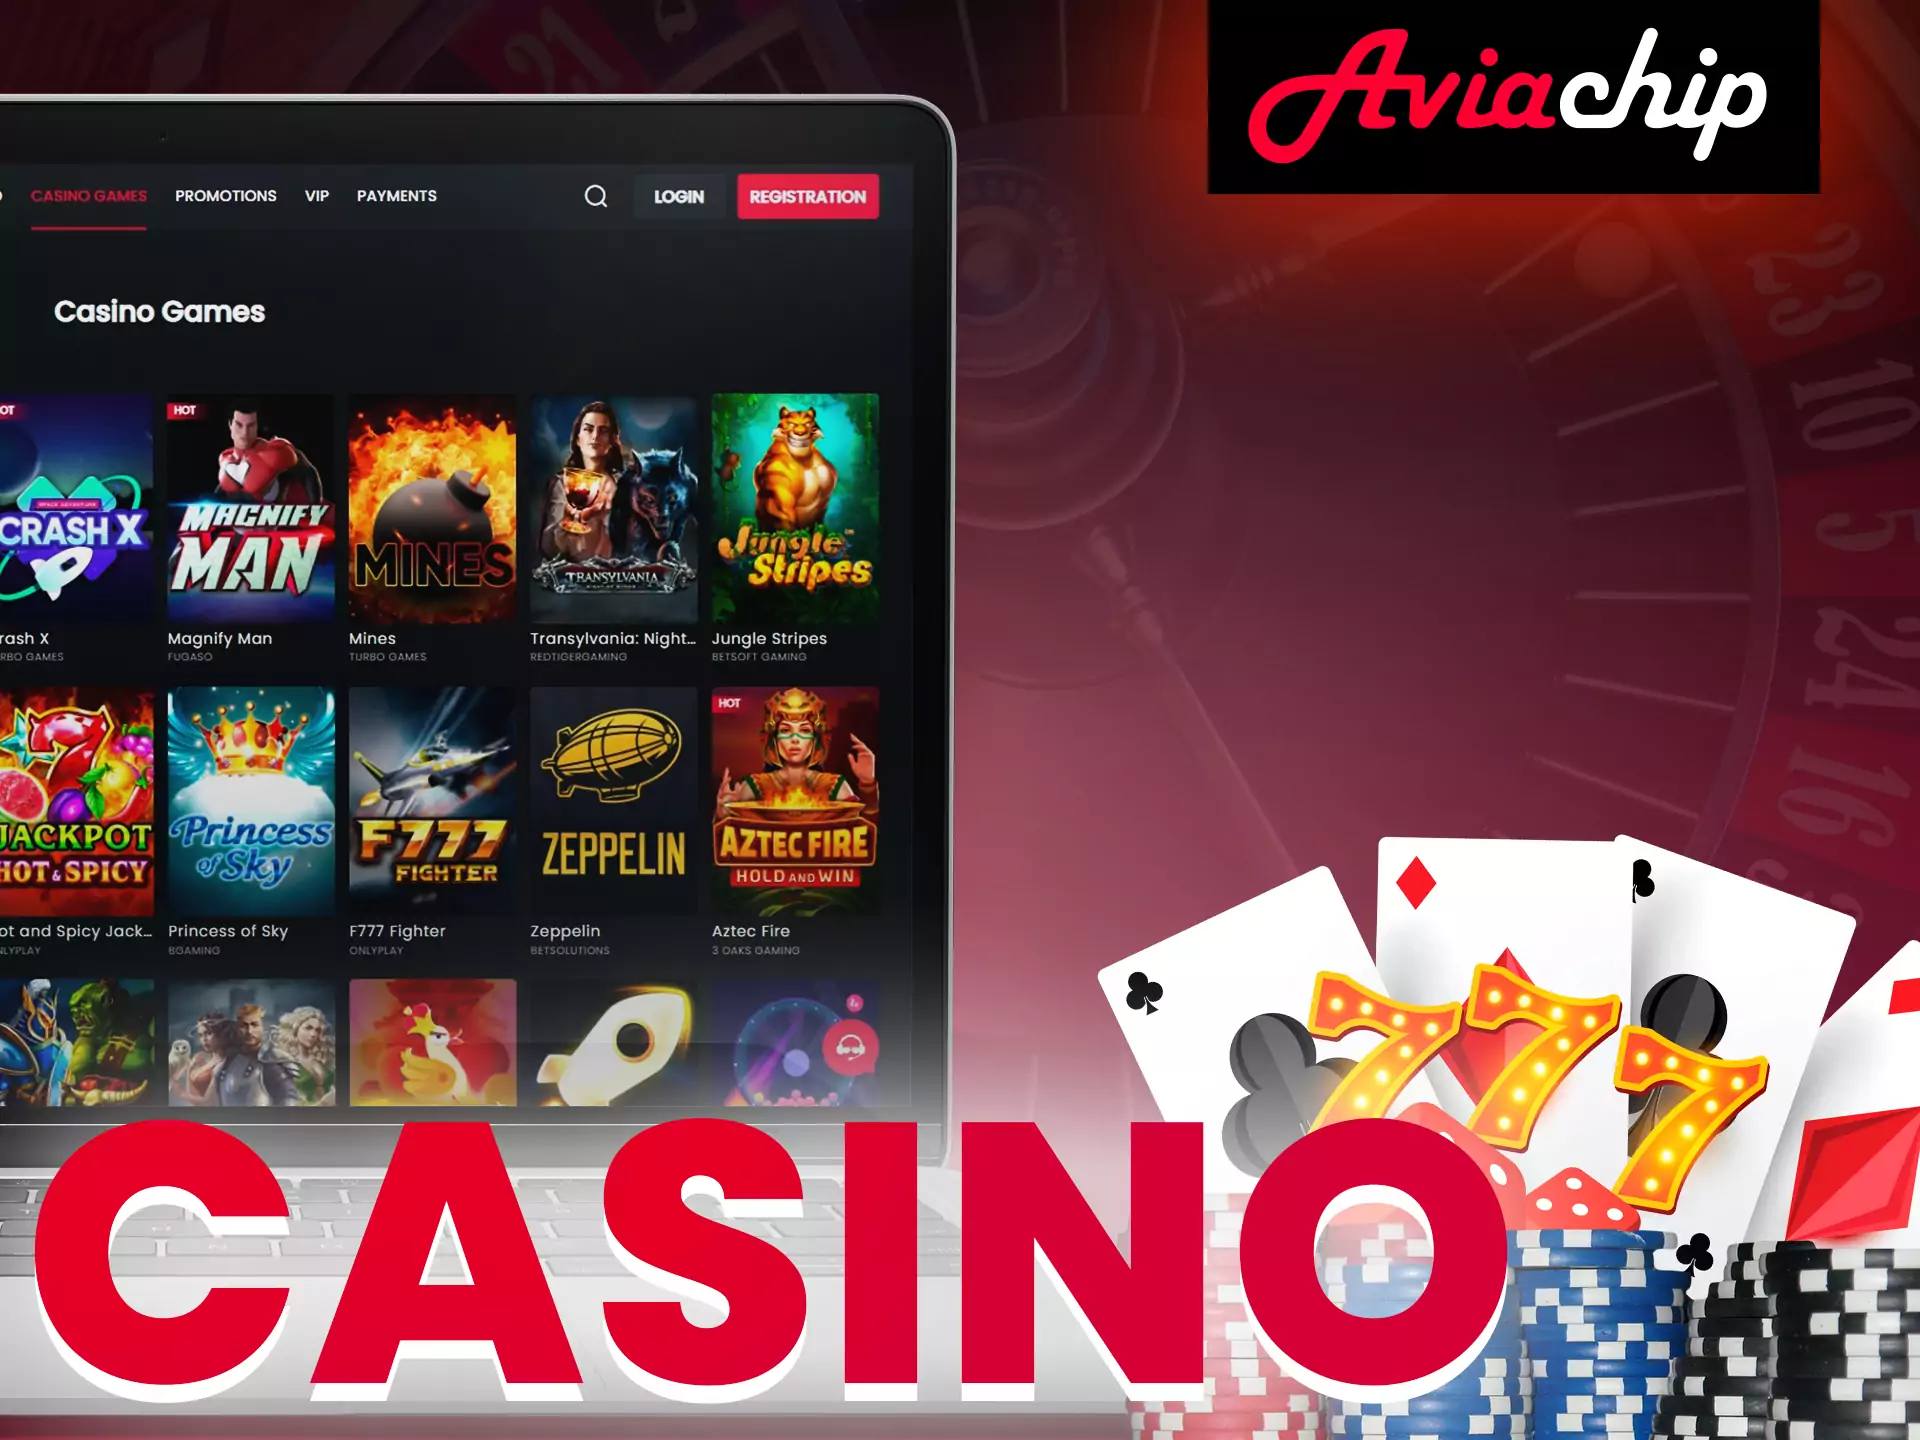 On Aviachip you can play baccarat.